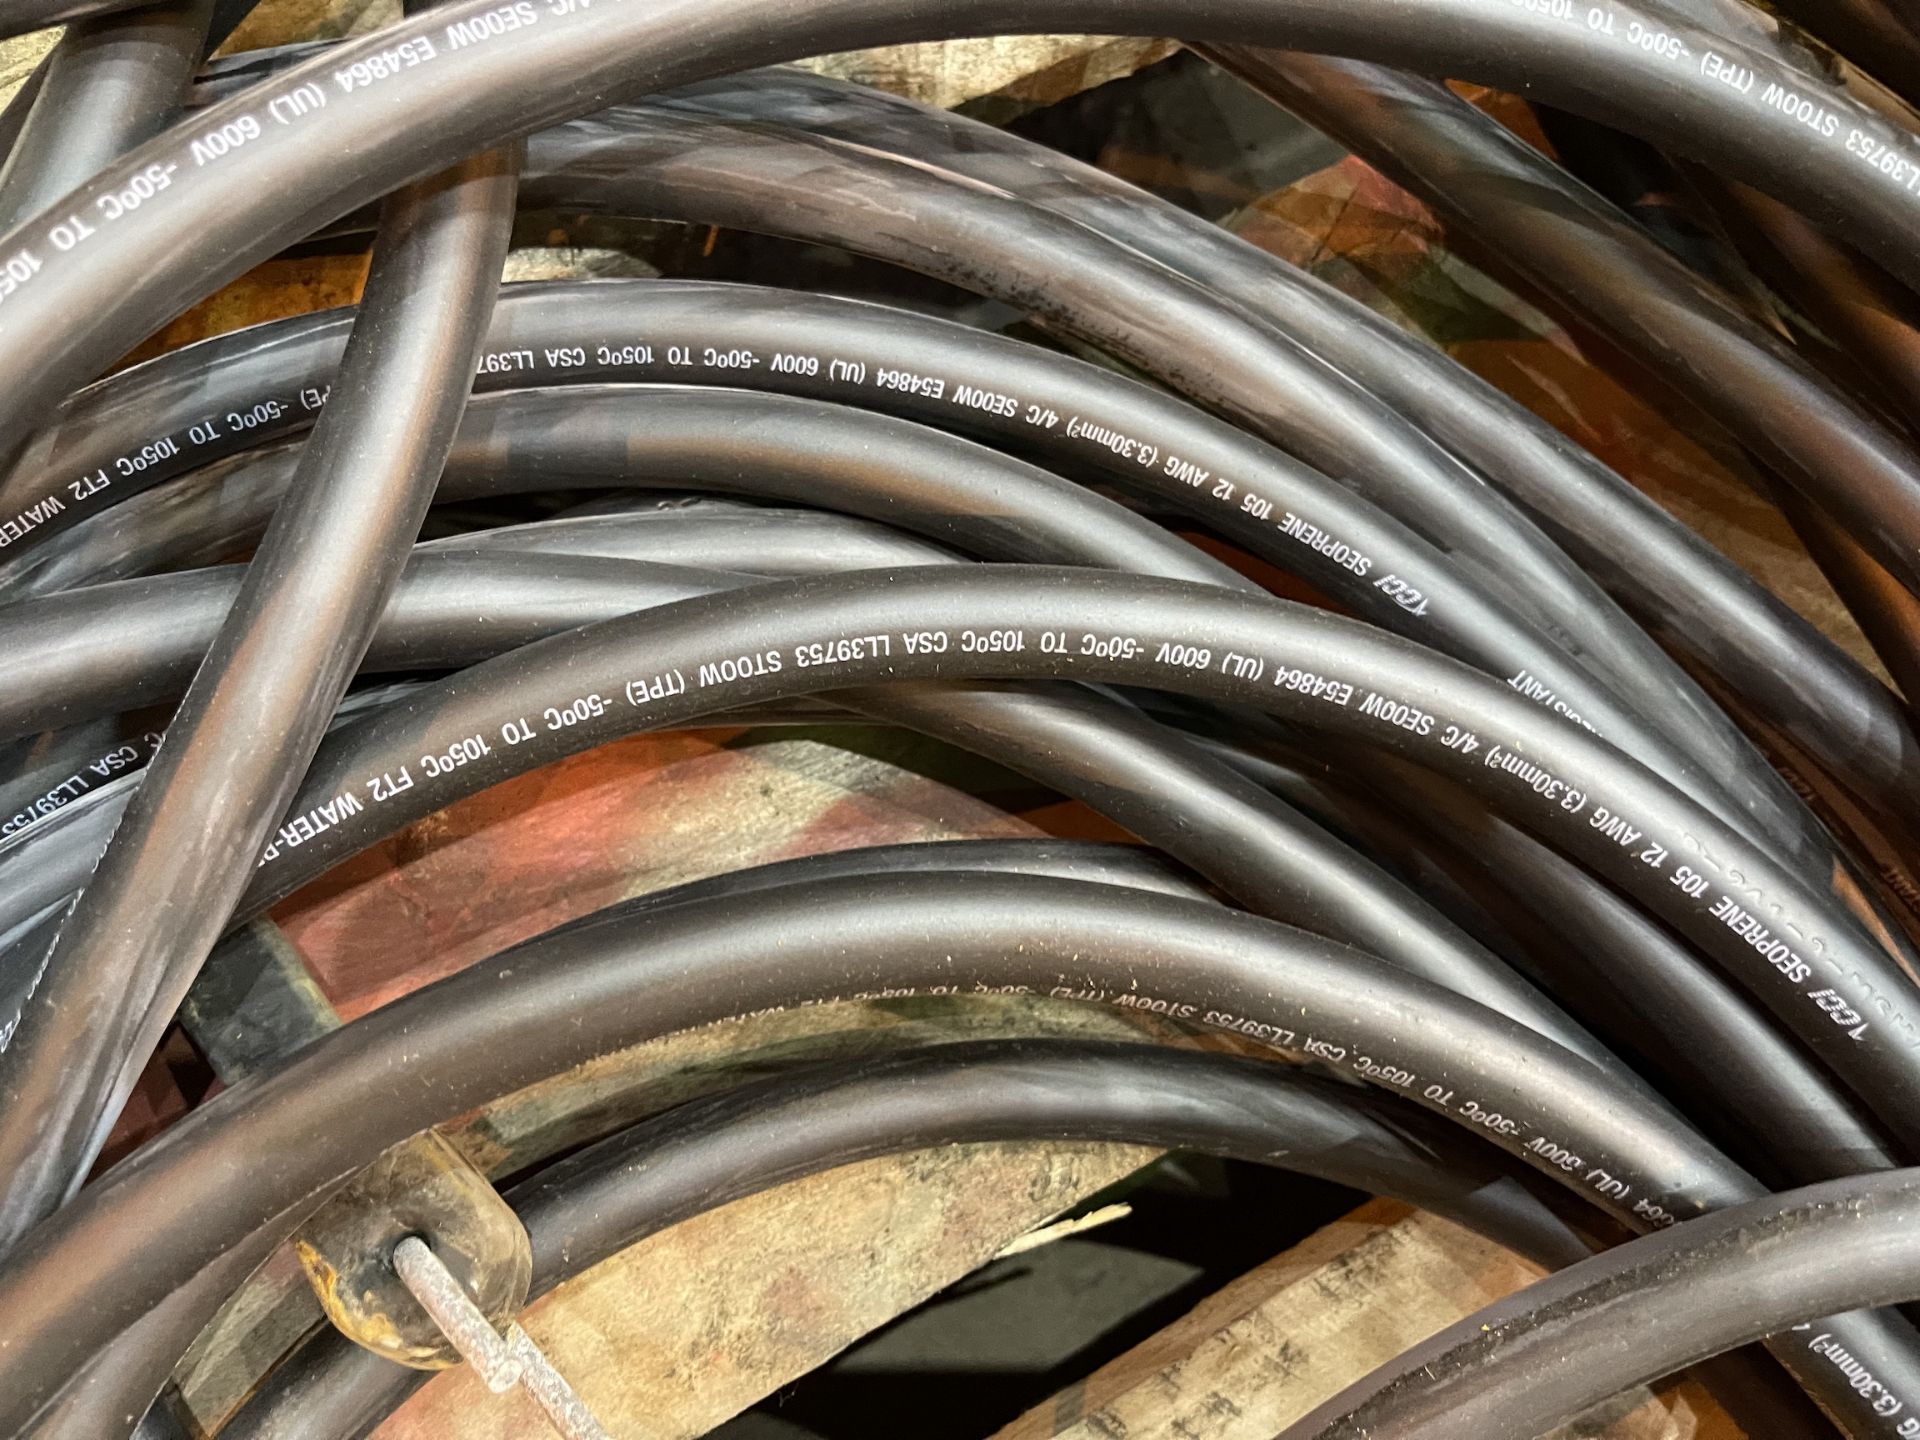 Lot of Flexible Tubing (DR163) - Lester, Pa - Image 7 of 9